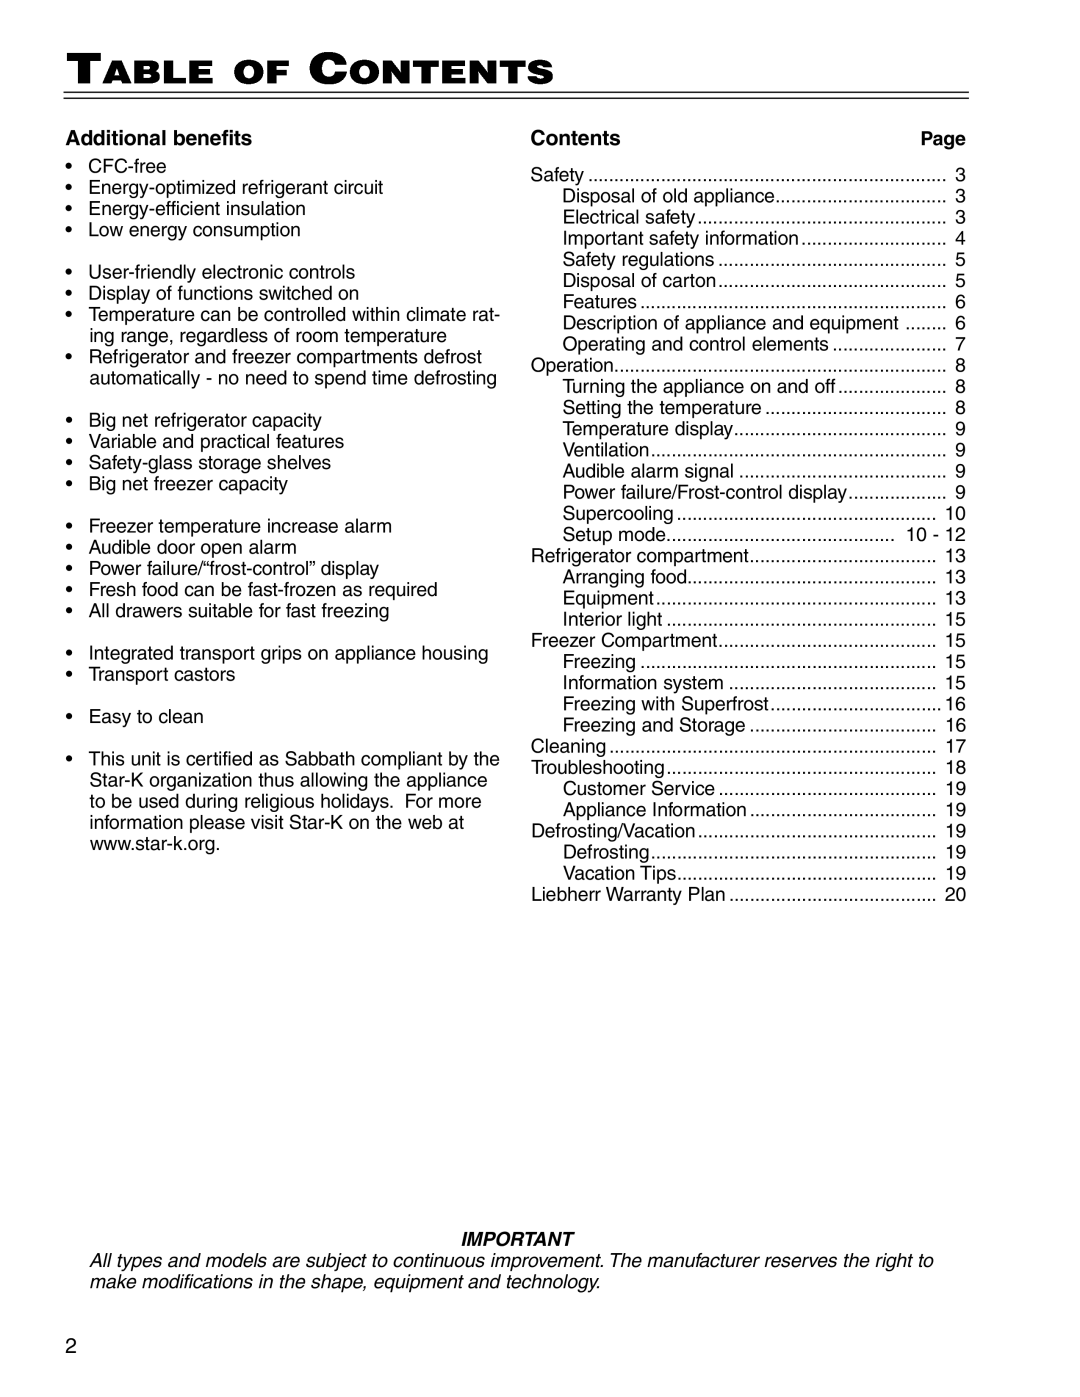 Liebherr CS 1611 7801 149-00 manual Table of Contents, Additional benefits 